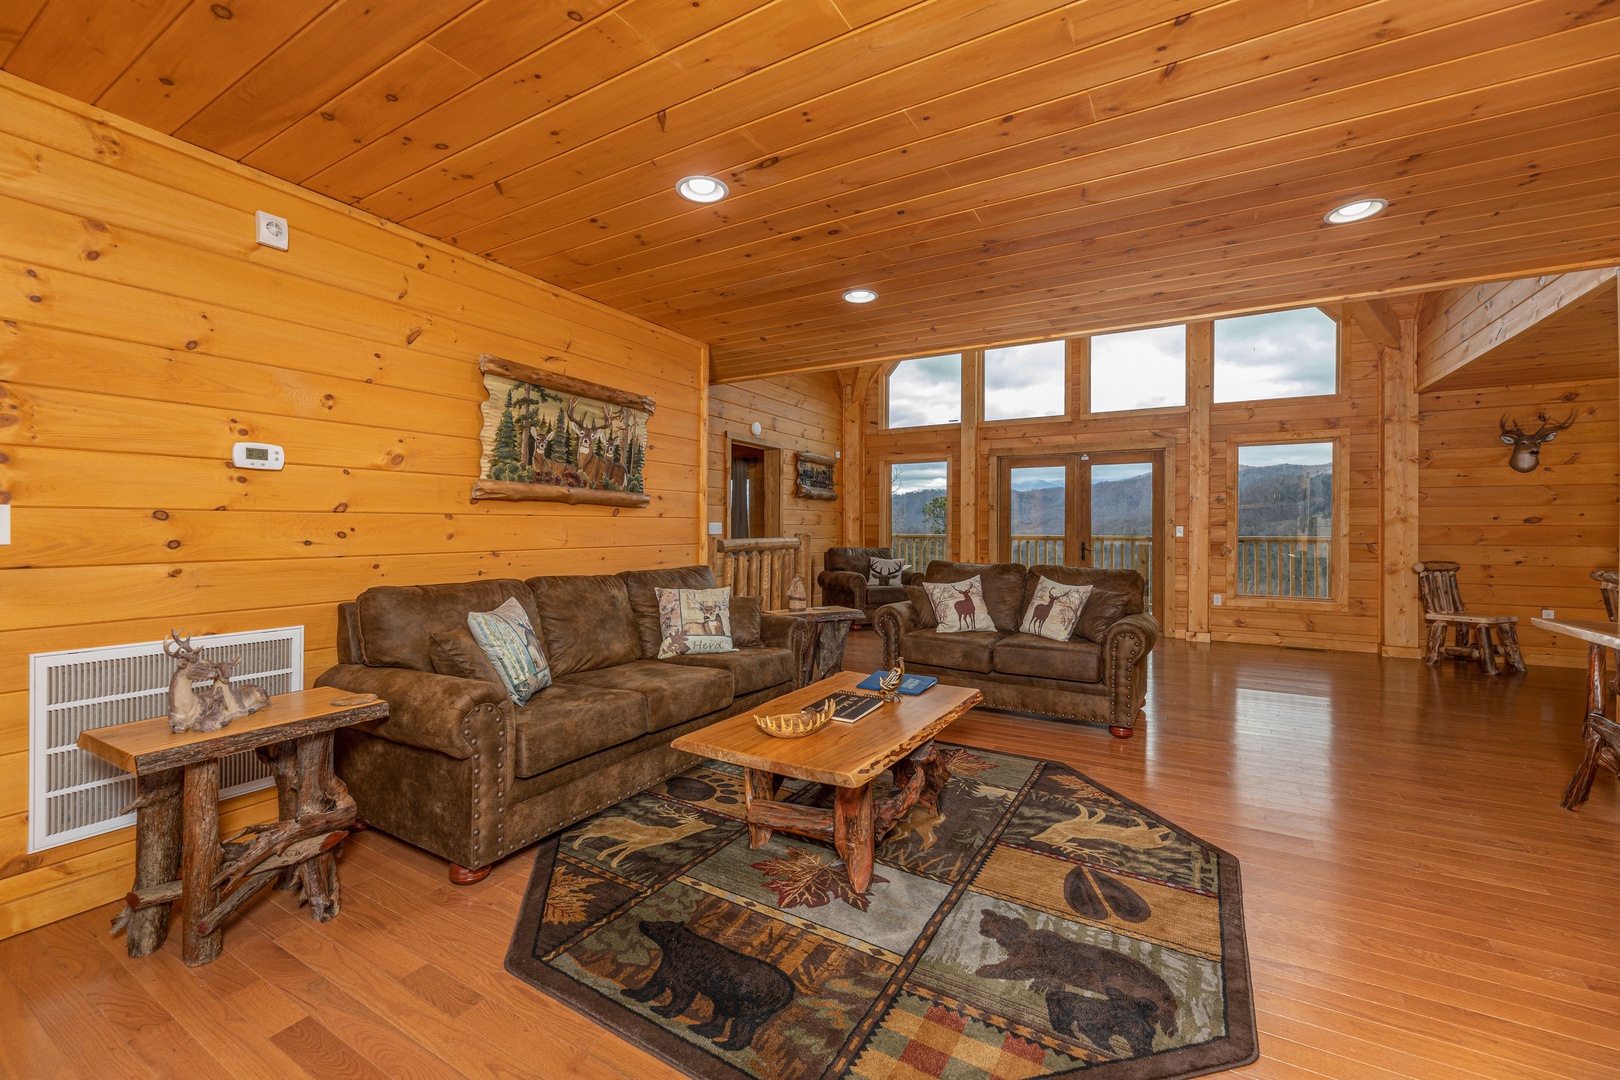 Sofa, loveseat, and coffee table at J's Hideaway, a 4 bedroom cabin rental located in Pigeon Forge